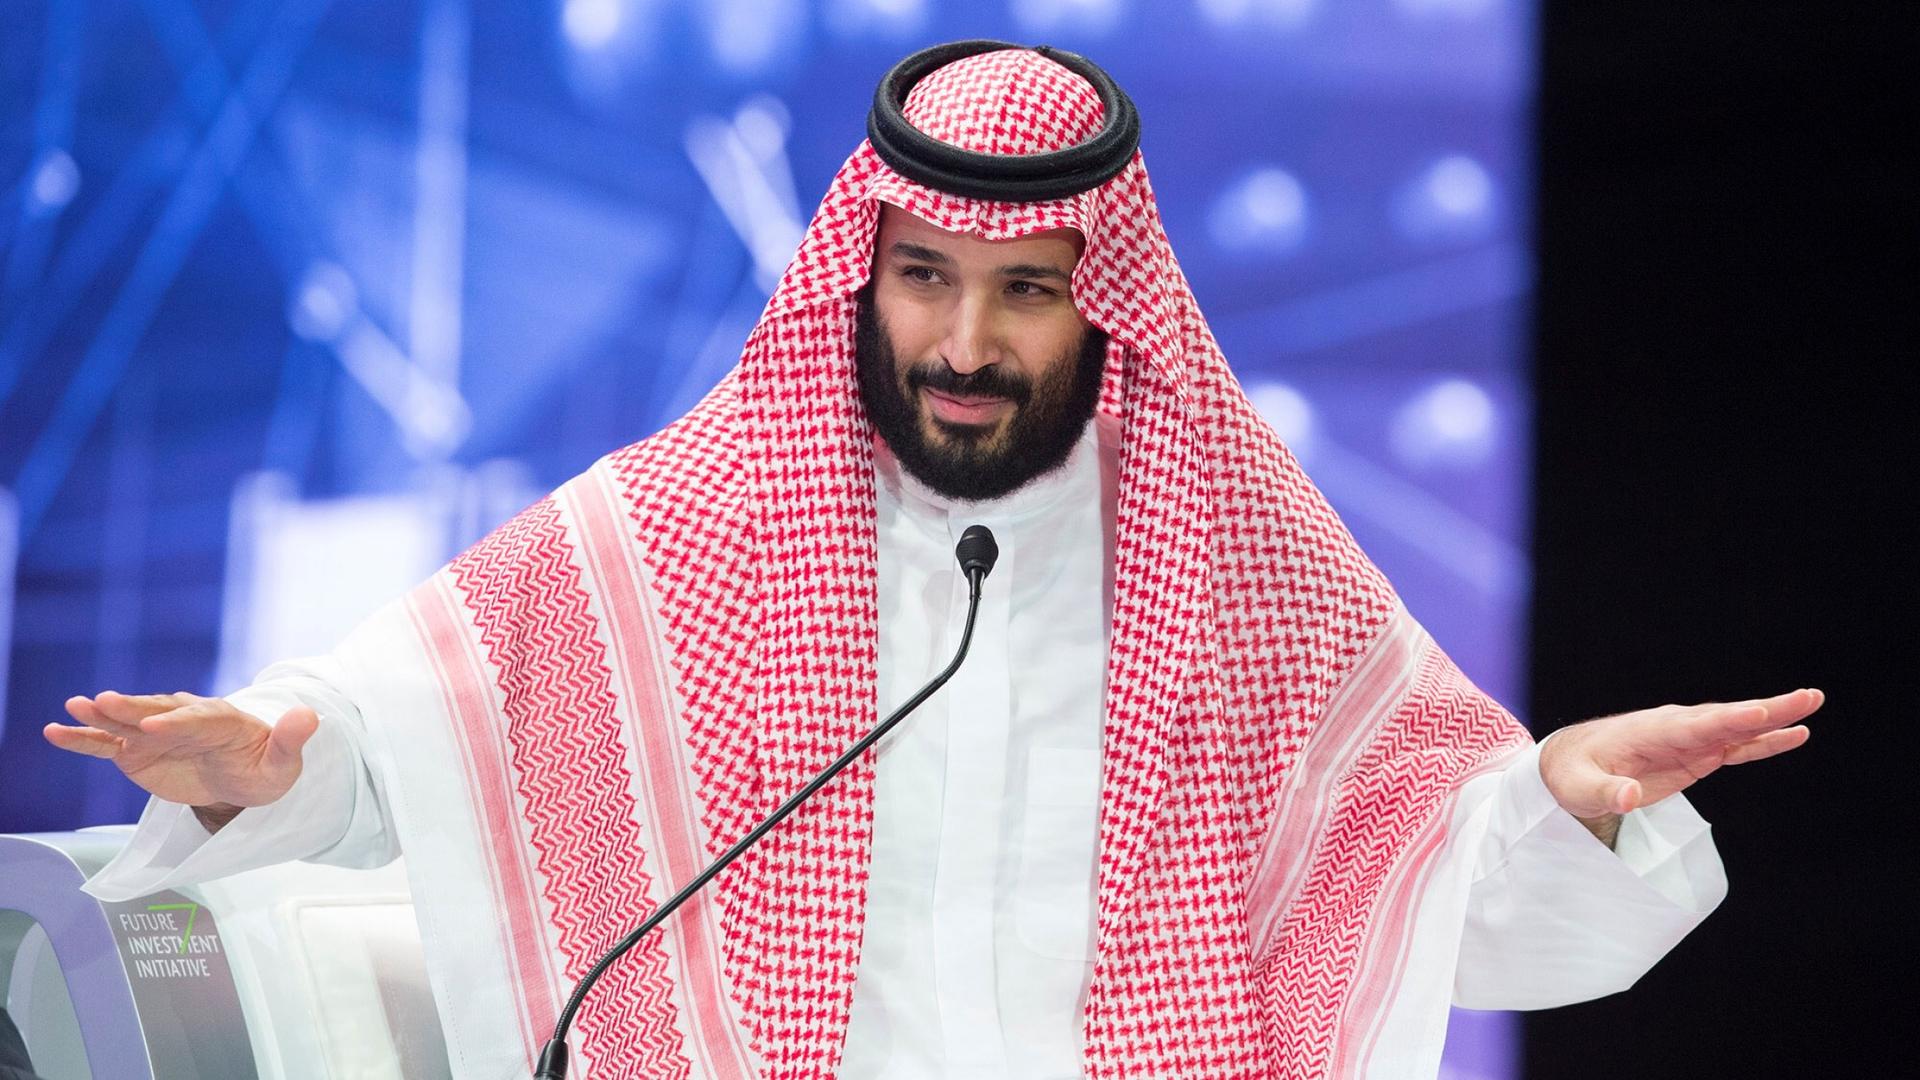 Crown Prince Mohammad bin Salman is picture with his hands outstretched, talking at a microphone